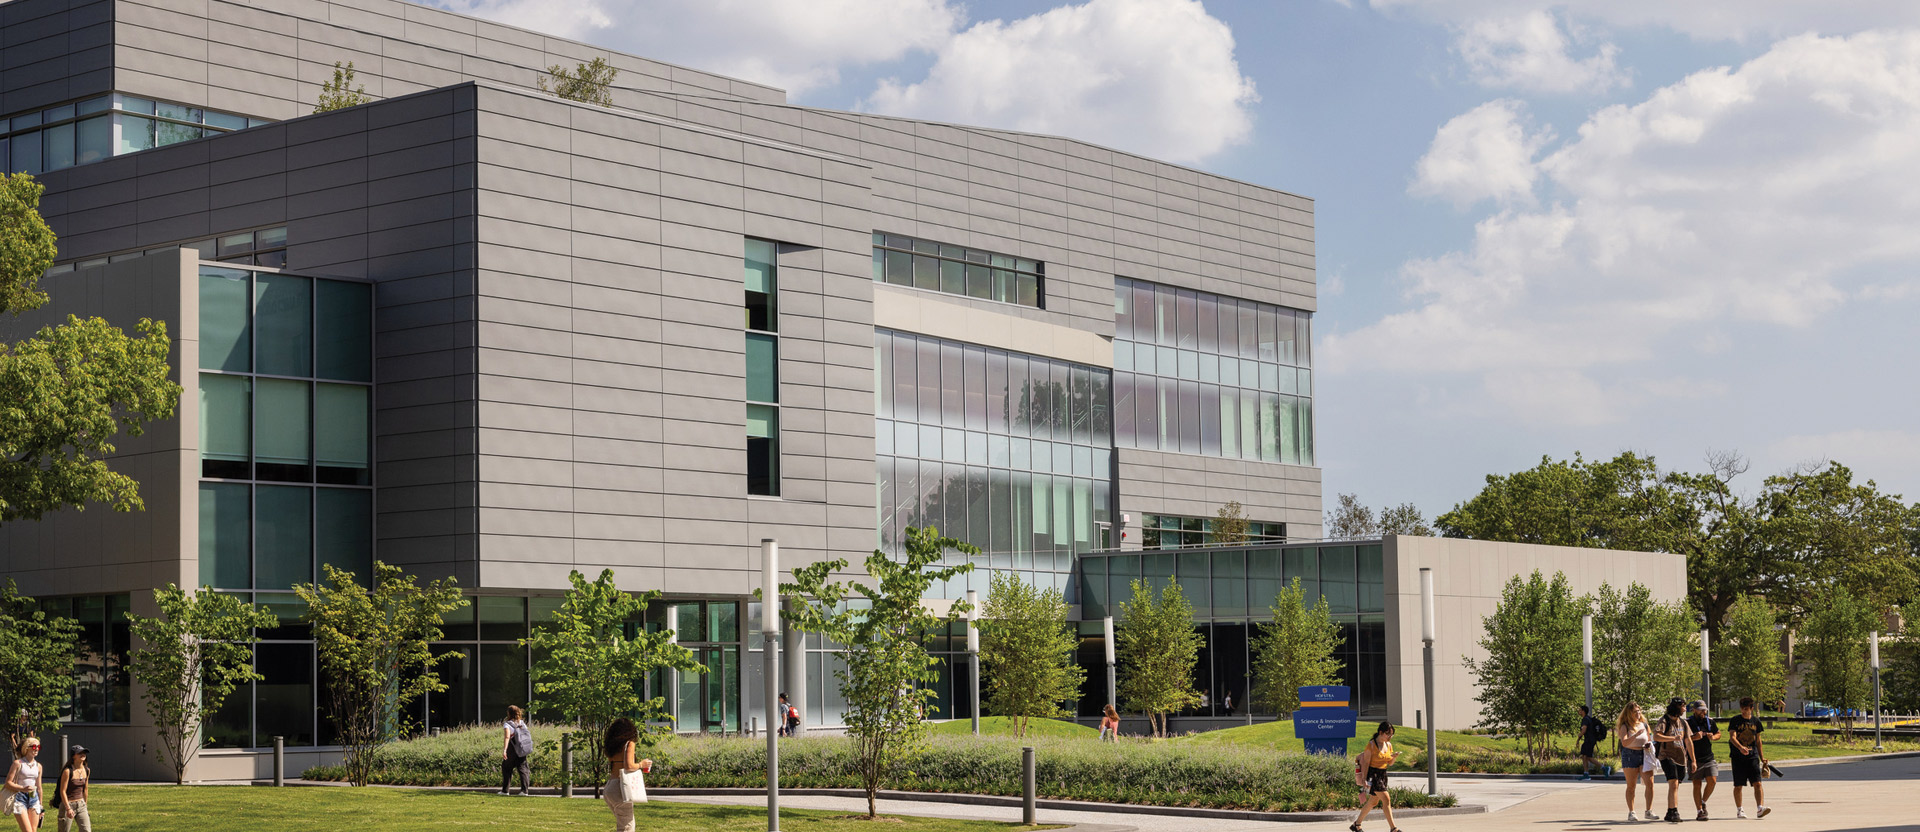 Modern educational building featuring clean lines, expansive glass facade for natural lighting, and aluminum composite panels. Landscaped with young trees and pedestrian pathways, the design encourages student engagement and environmental harmony.